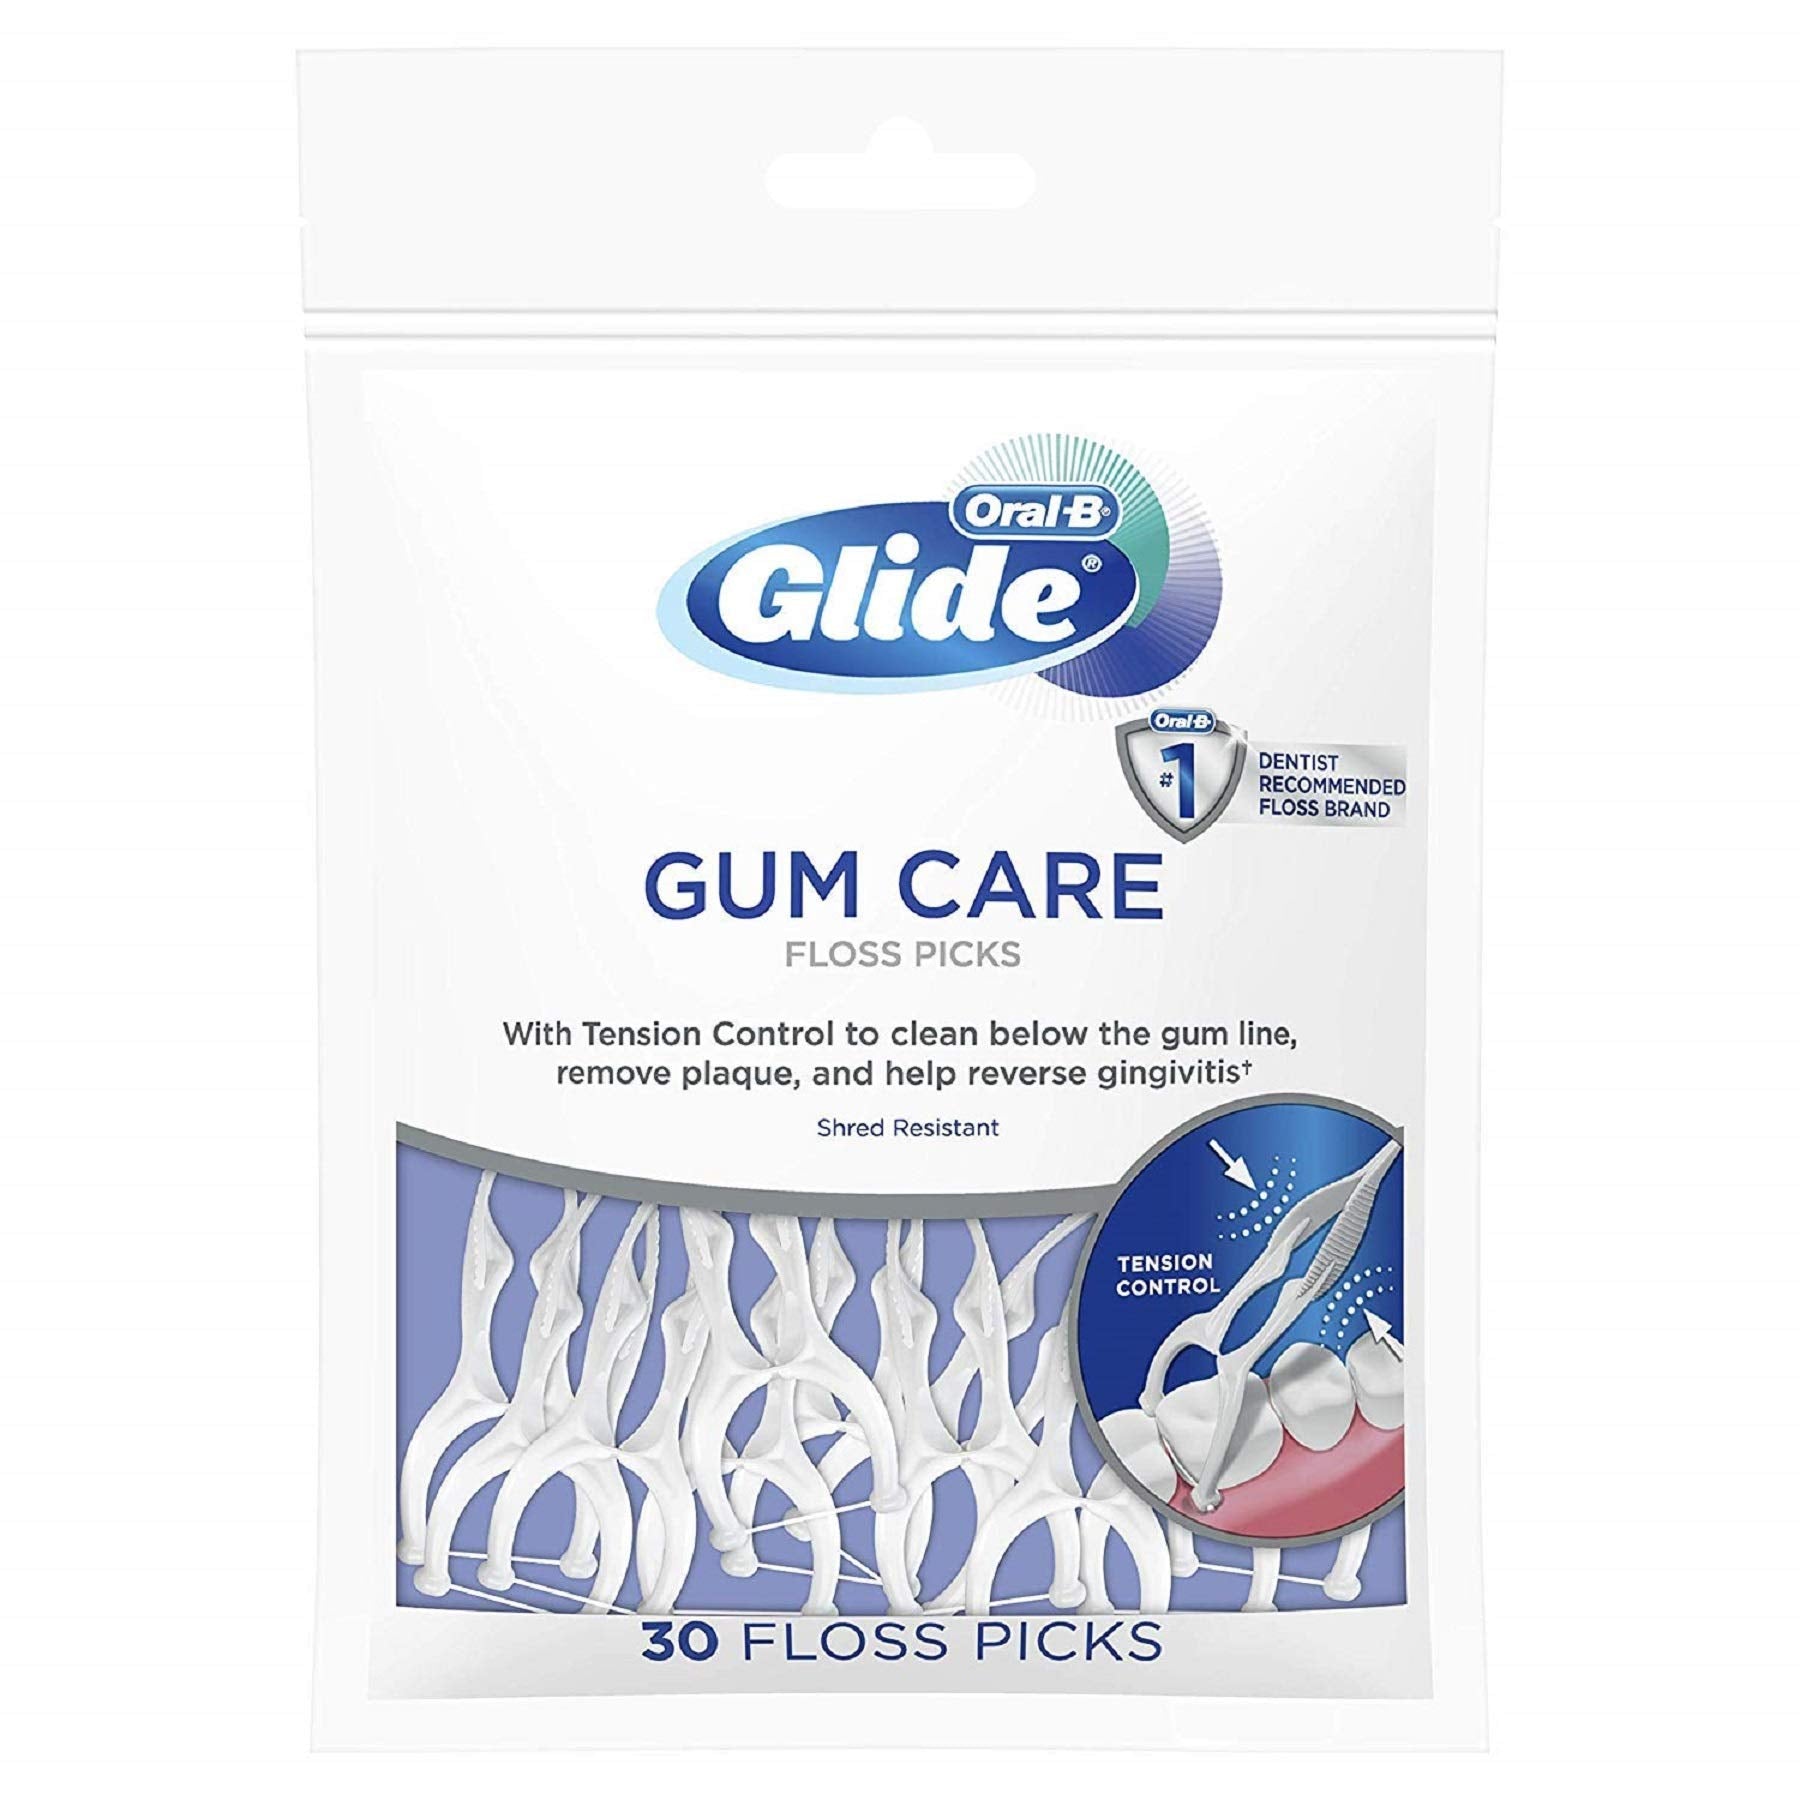 Oral-B Glide Gum Care Floss Picks, 30 Count (Pack of 1)